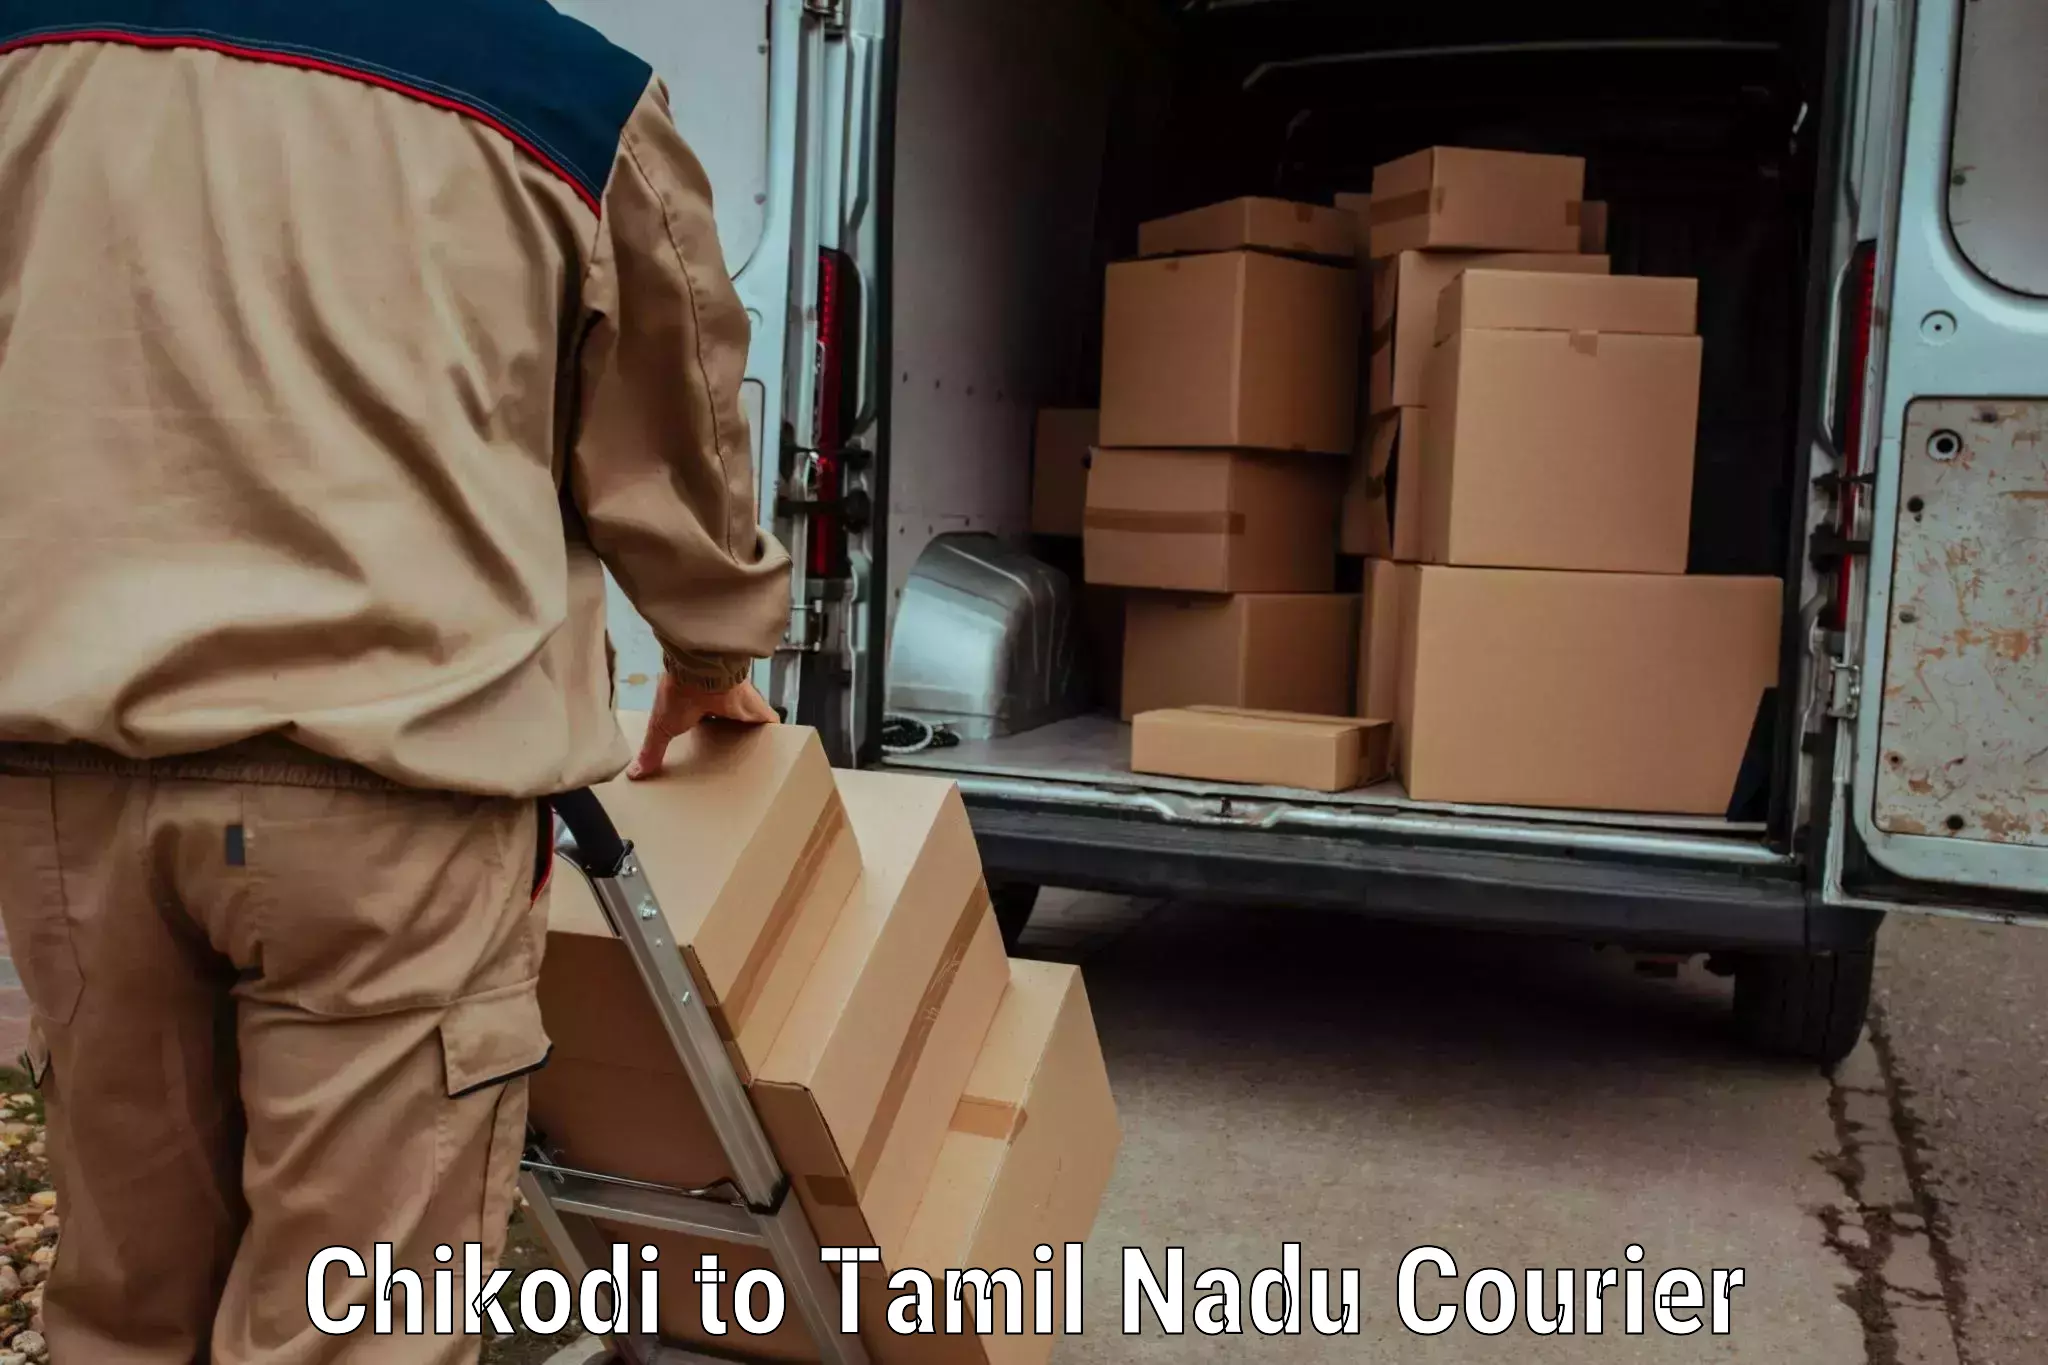 Courier service partnerships Chikodi to Trichy